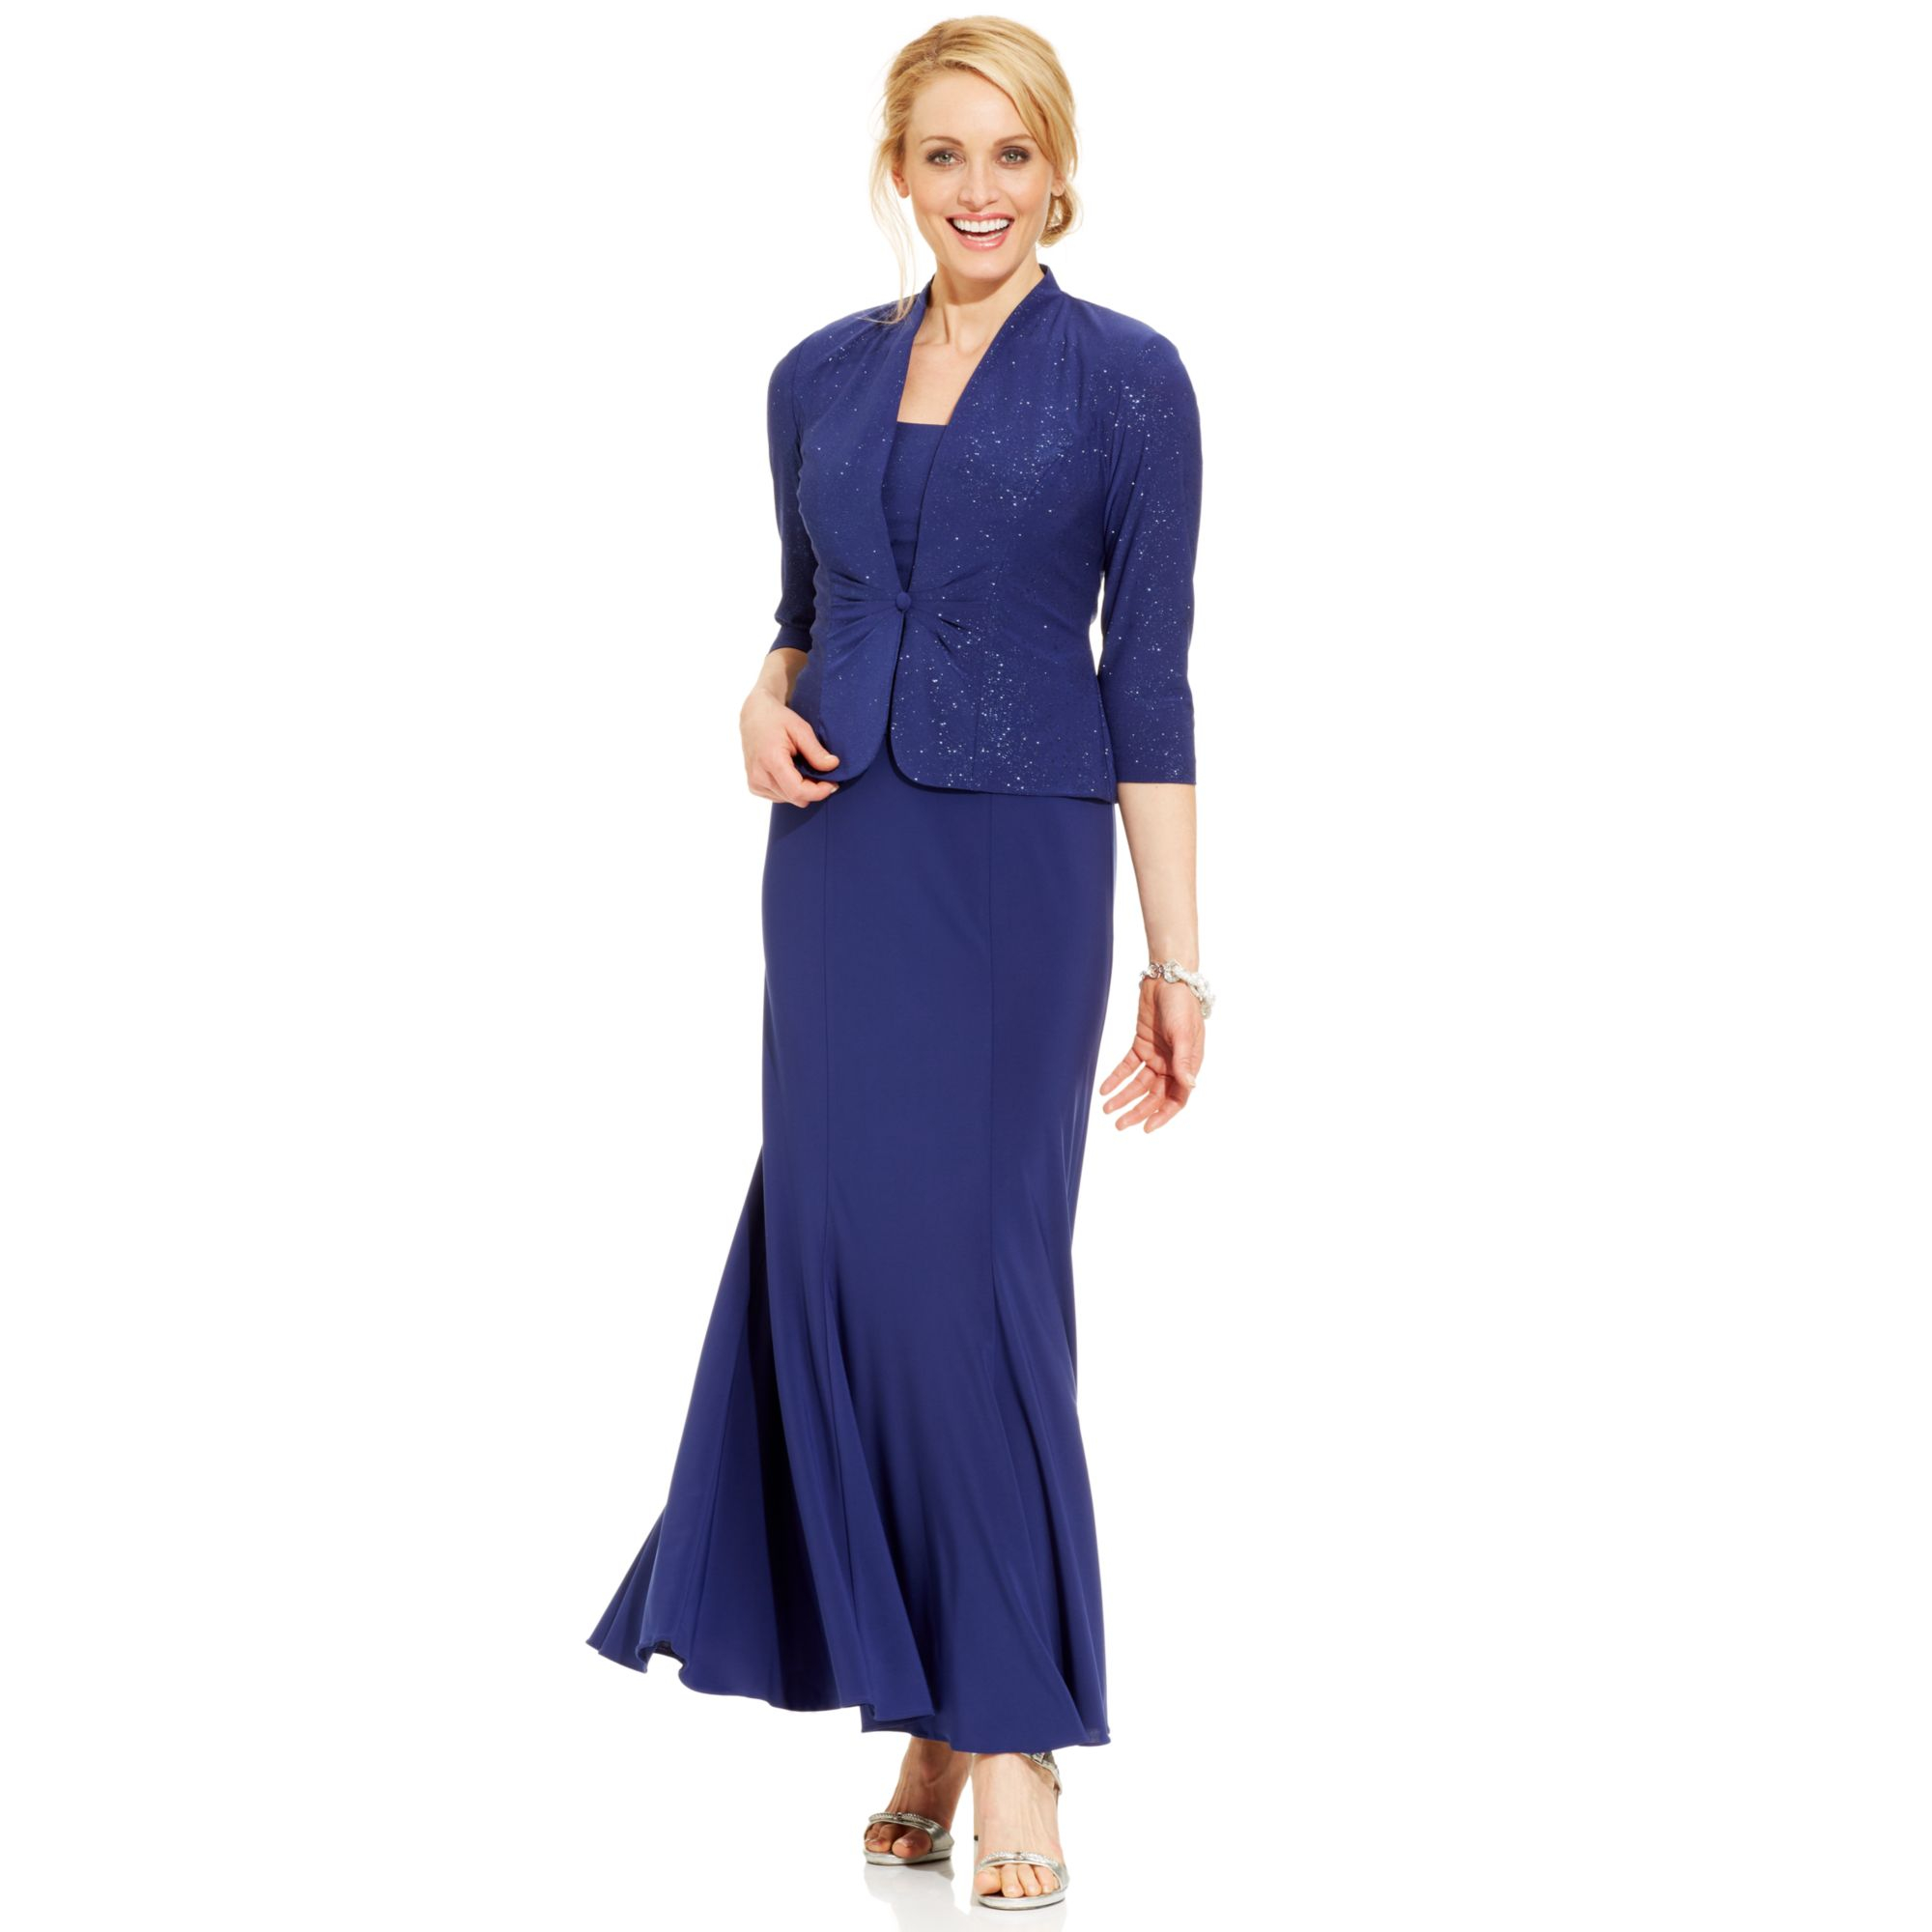 Lyst - Alex Evenings Sleeveless Jacquard Sparkle Gown and Jacket in Purple